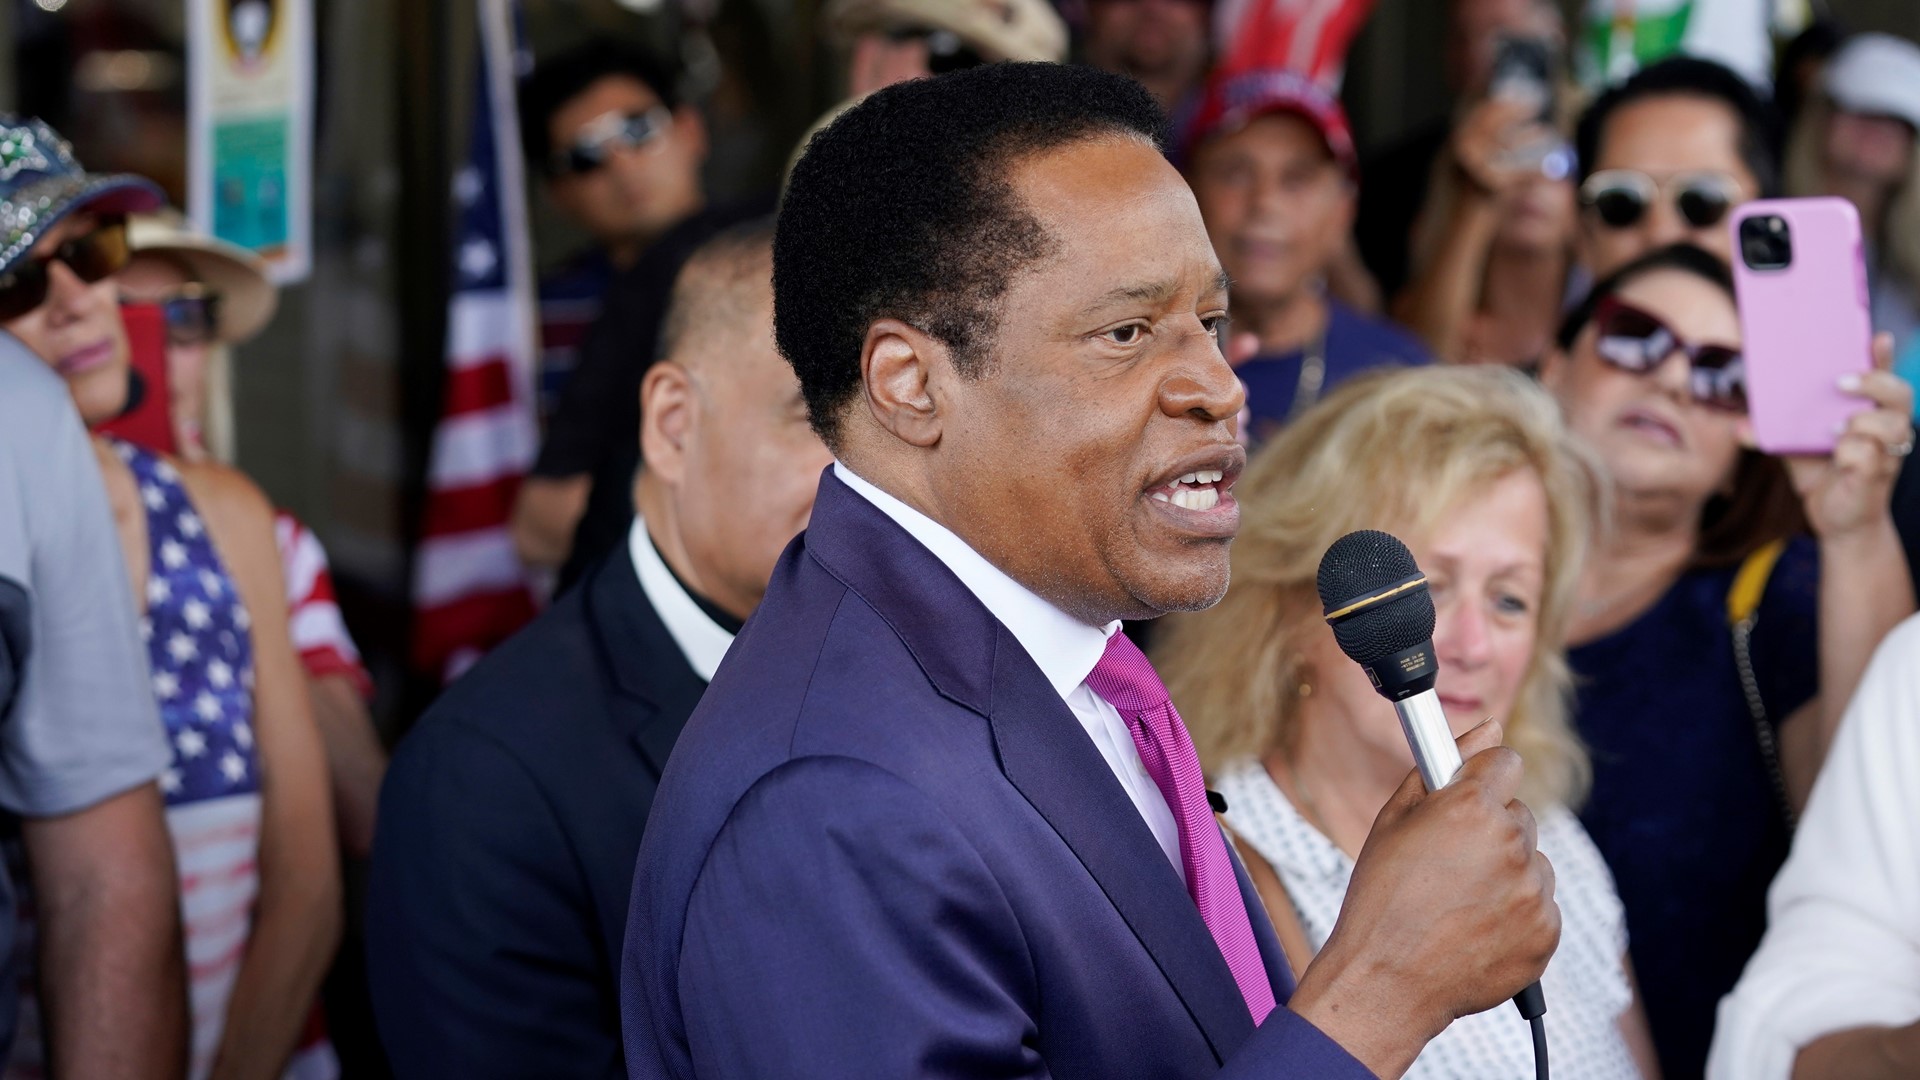 Conservative talk radio host Larry Elder will be on the ballot for California’s gubernatorial recall election. Here is what you need to know before Sept. 14.